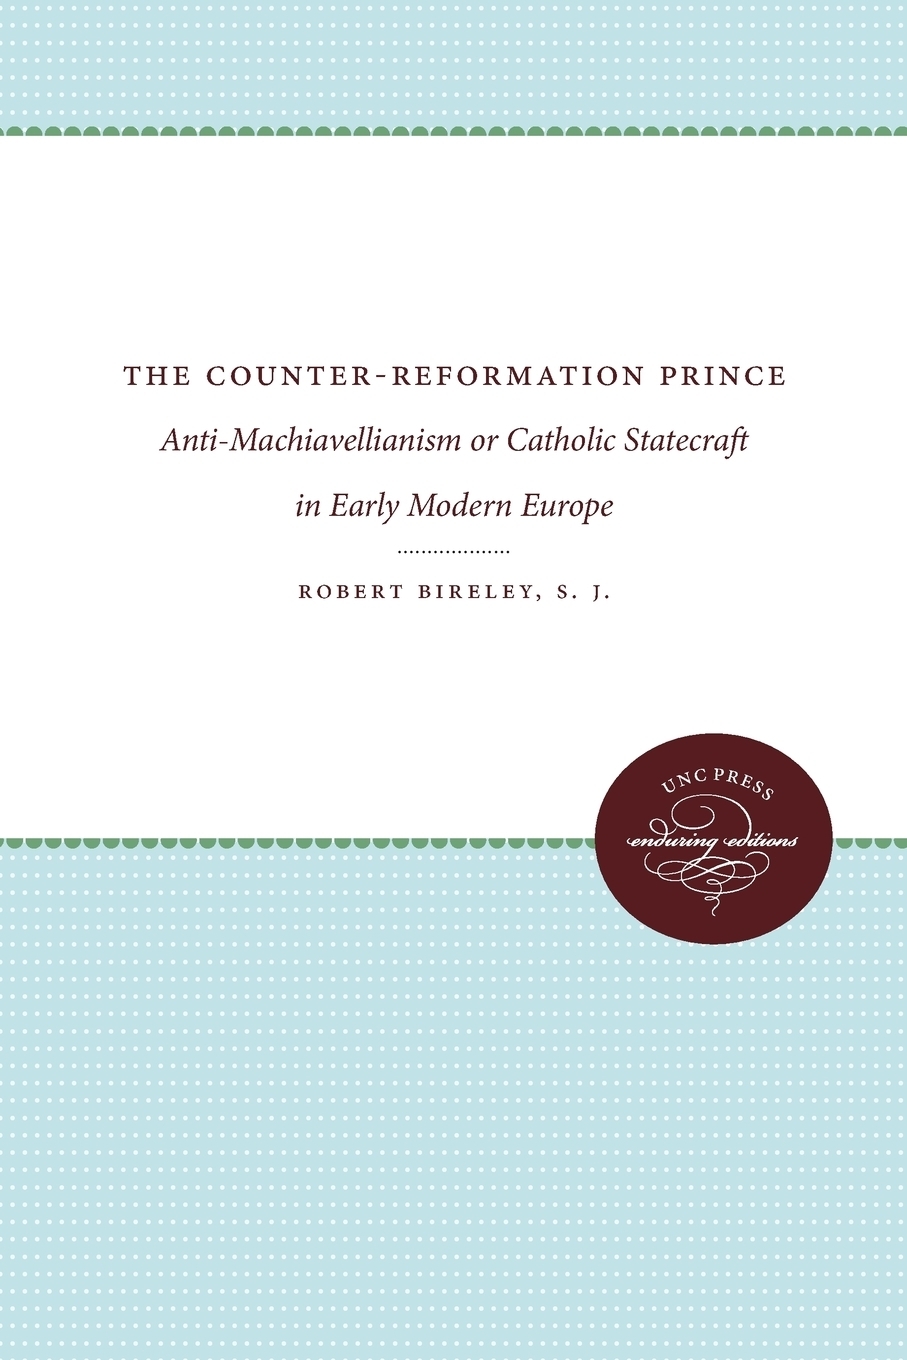 The Counter-Reformation Prince. Anti-Machiavellianism or Catholic Statecraft in Early Modern Europe